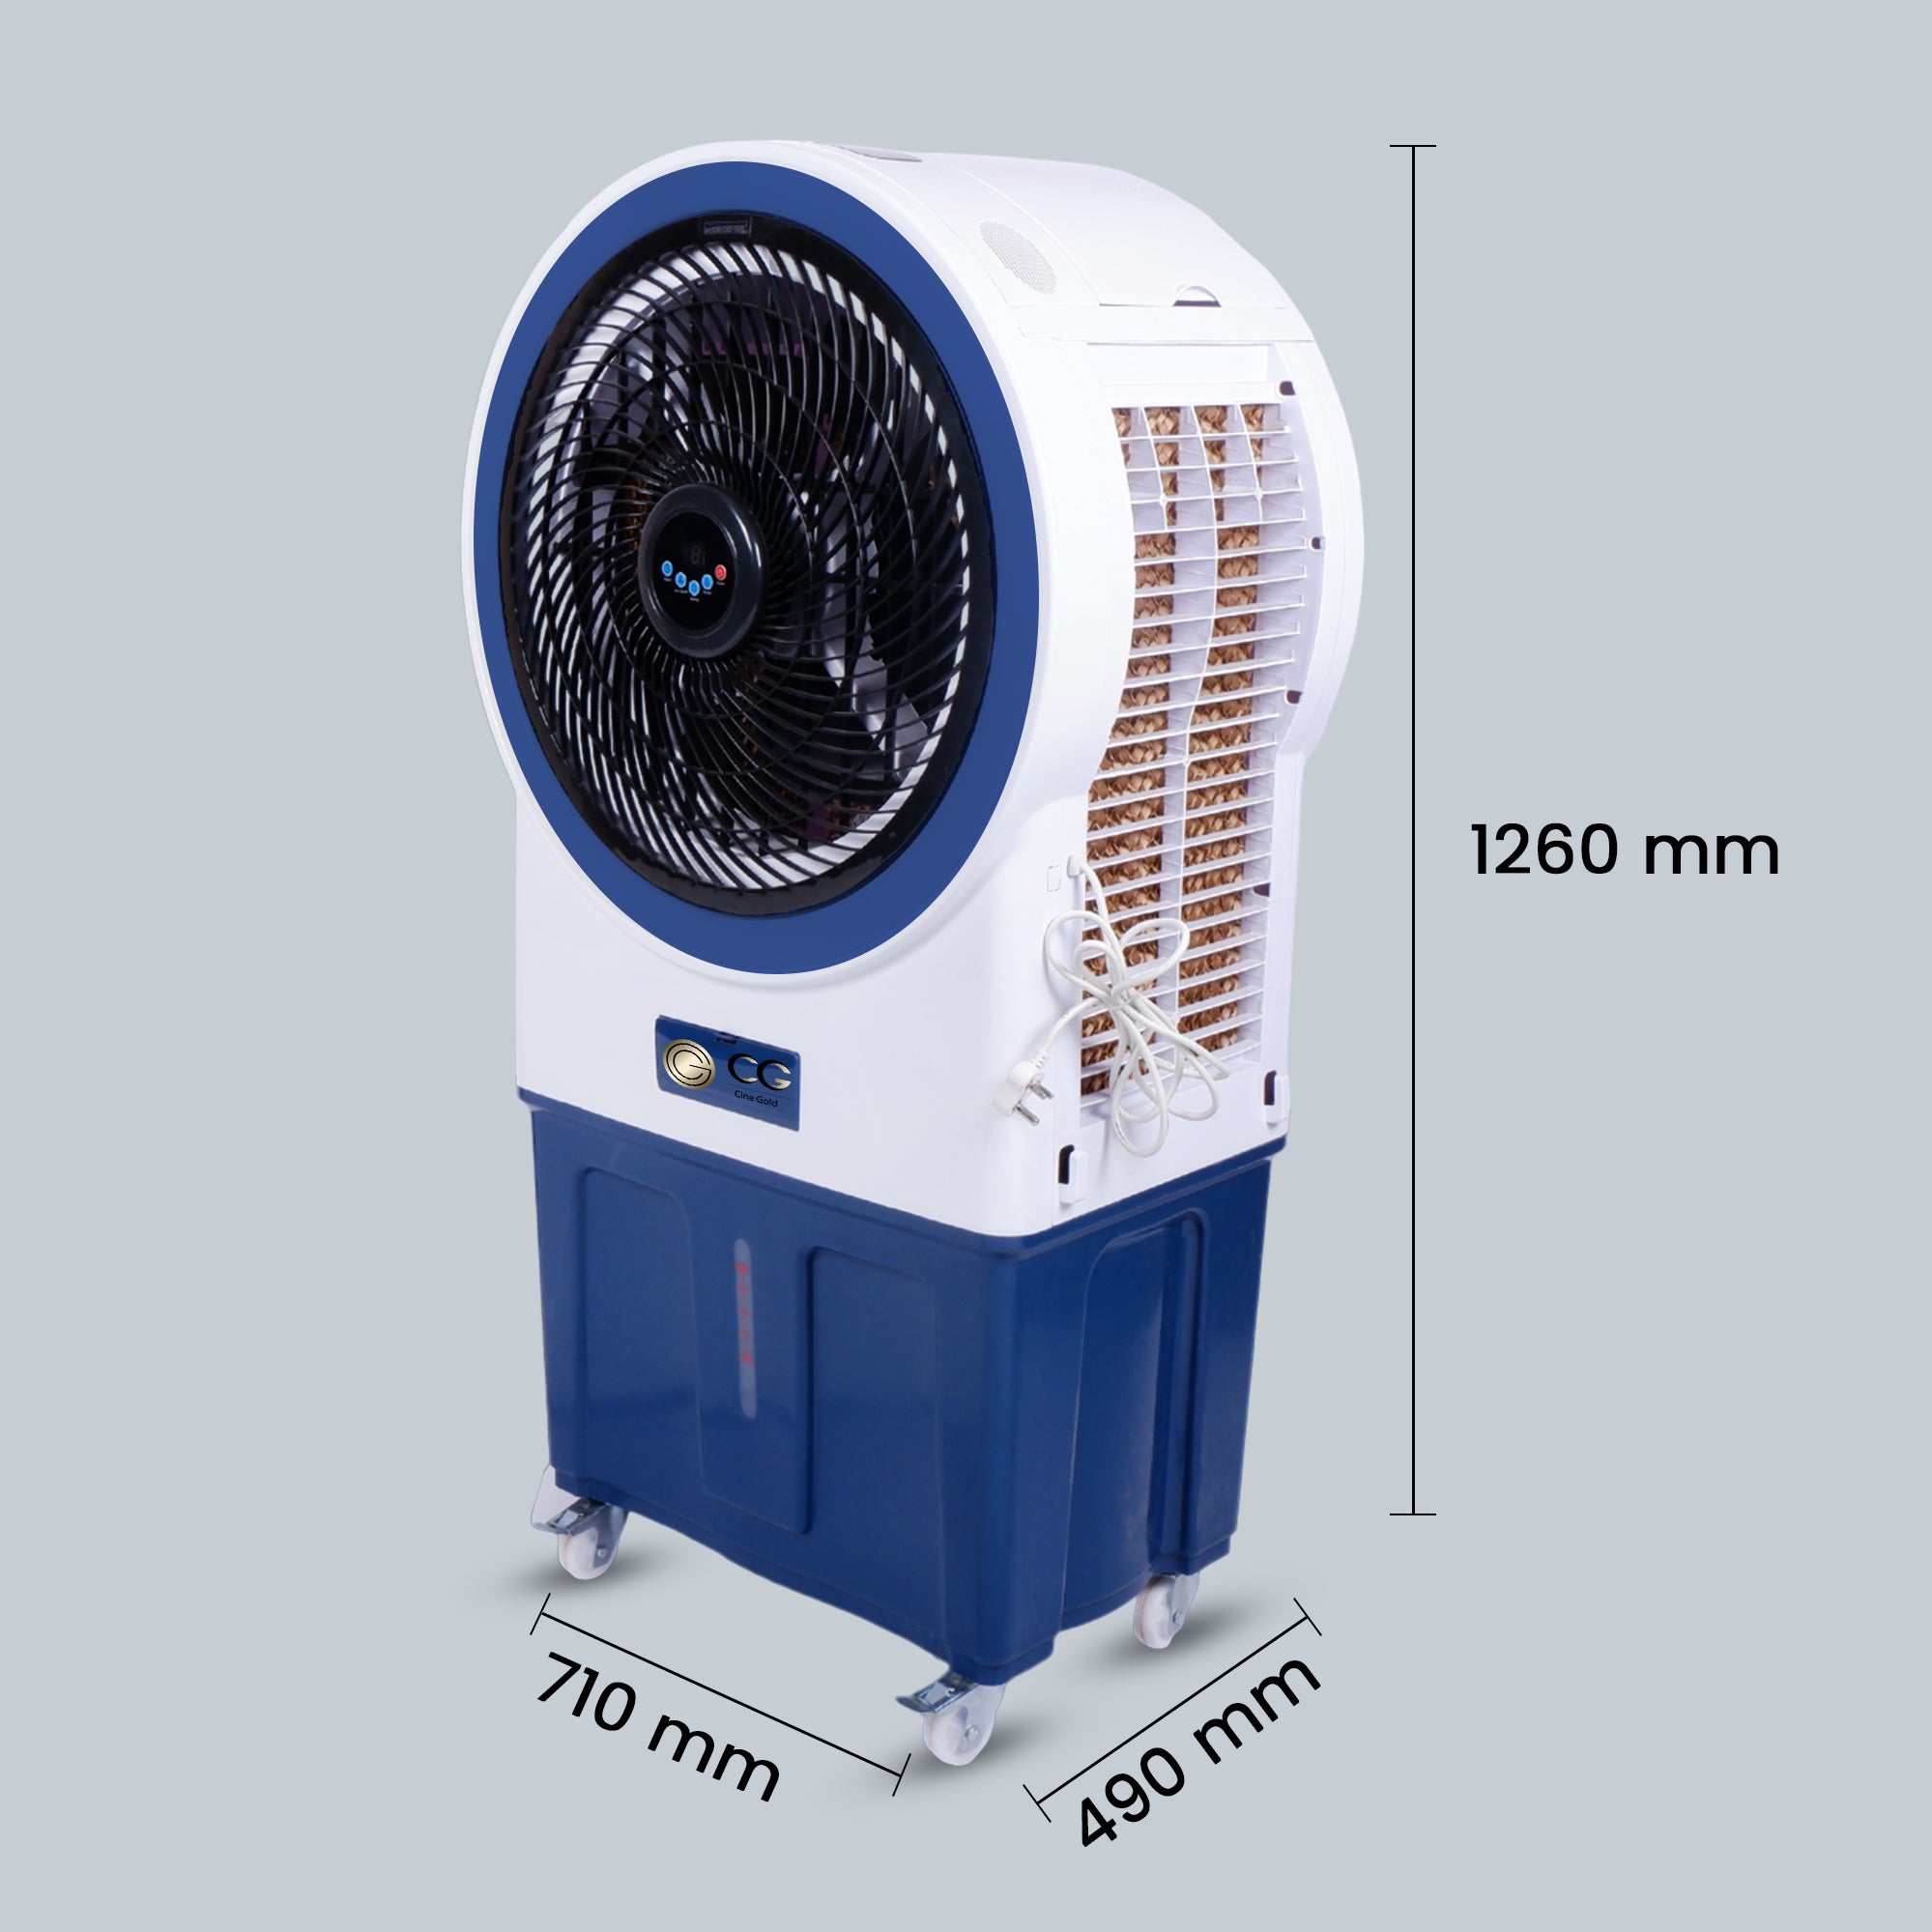 Cine Gold Oreo 80 LTRS  Heavy Duty Tower Air Cooler For Home/Office With Honeycomb Cooling & Auto Swing Technology, Powerful Air Throw & 3-Speed Control With Ice top chamber White & Navy Blue